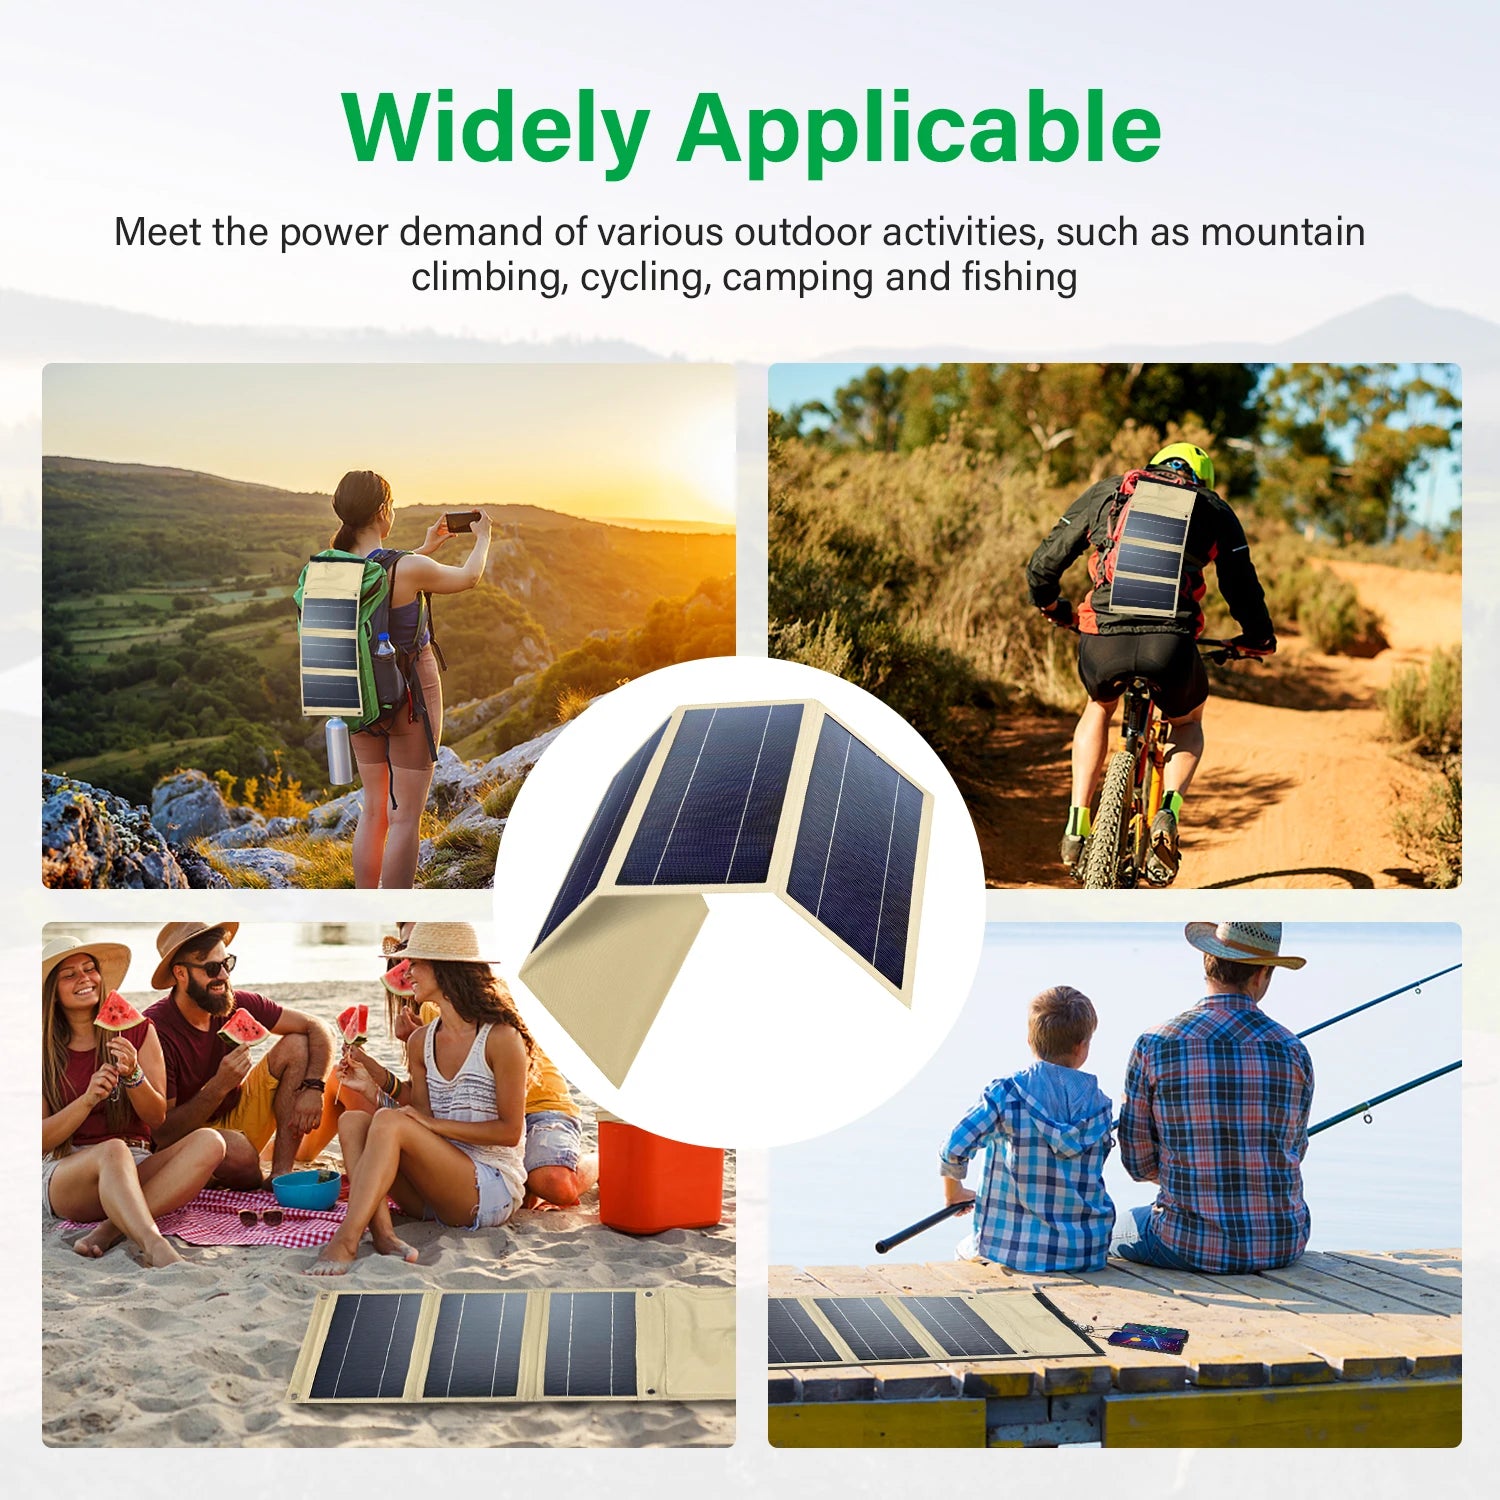 21W Solar Panel, Portable charger for outdoor adventures: hike, bike, camp, fish and stay powered.